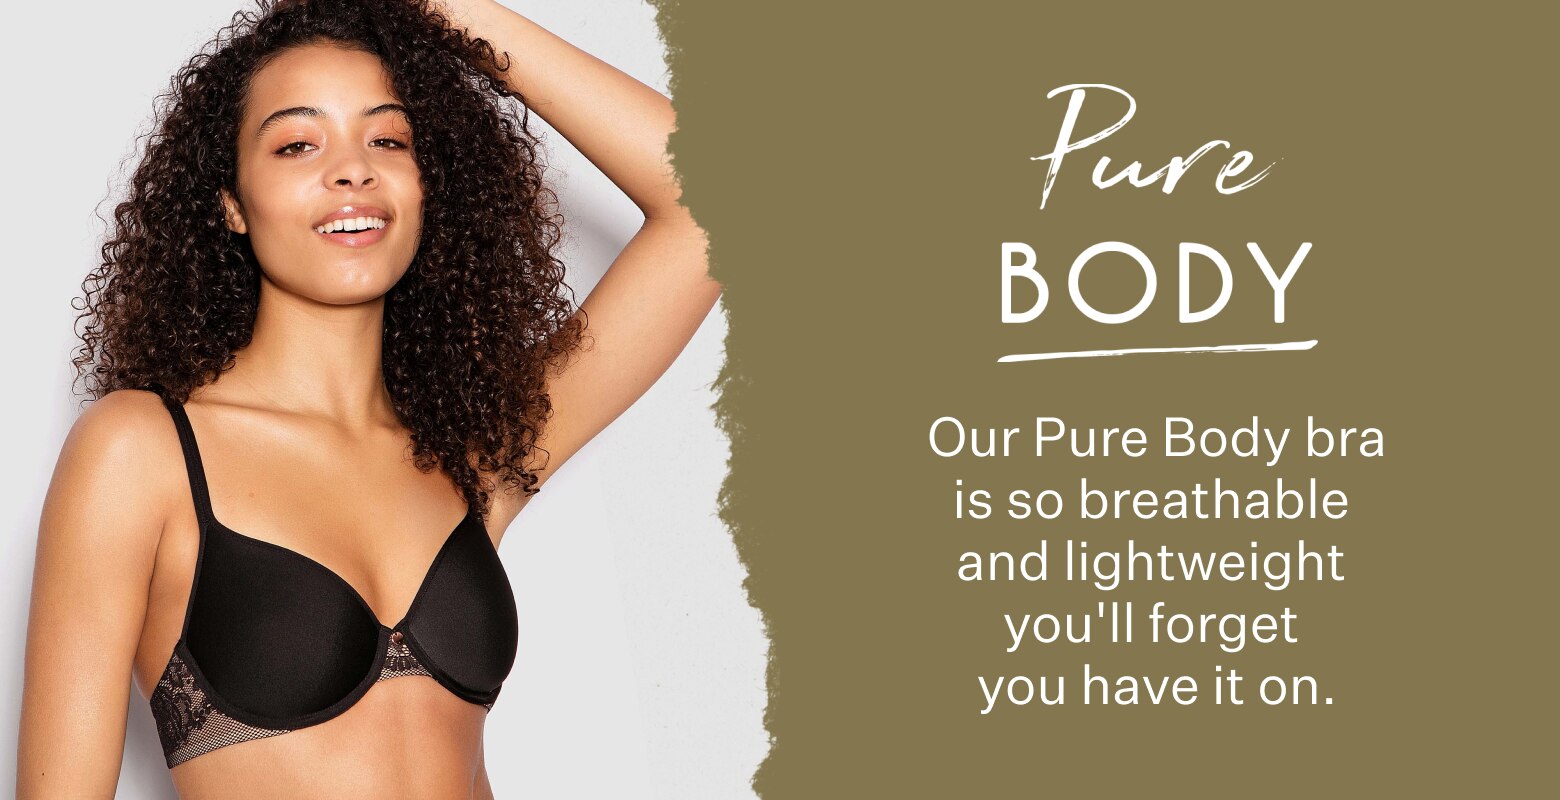 Pure Body. Our Pure Body bra is so breathable and lightweight you'll forget you have it on.